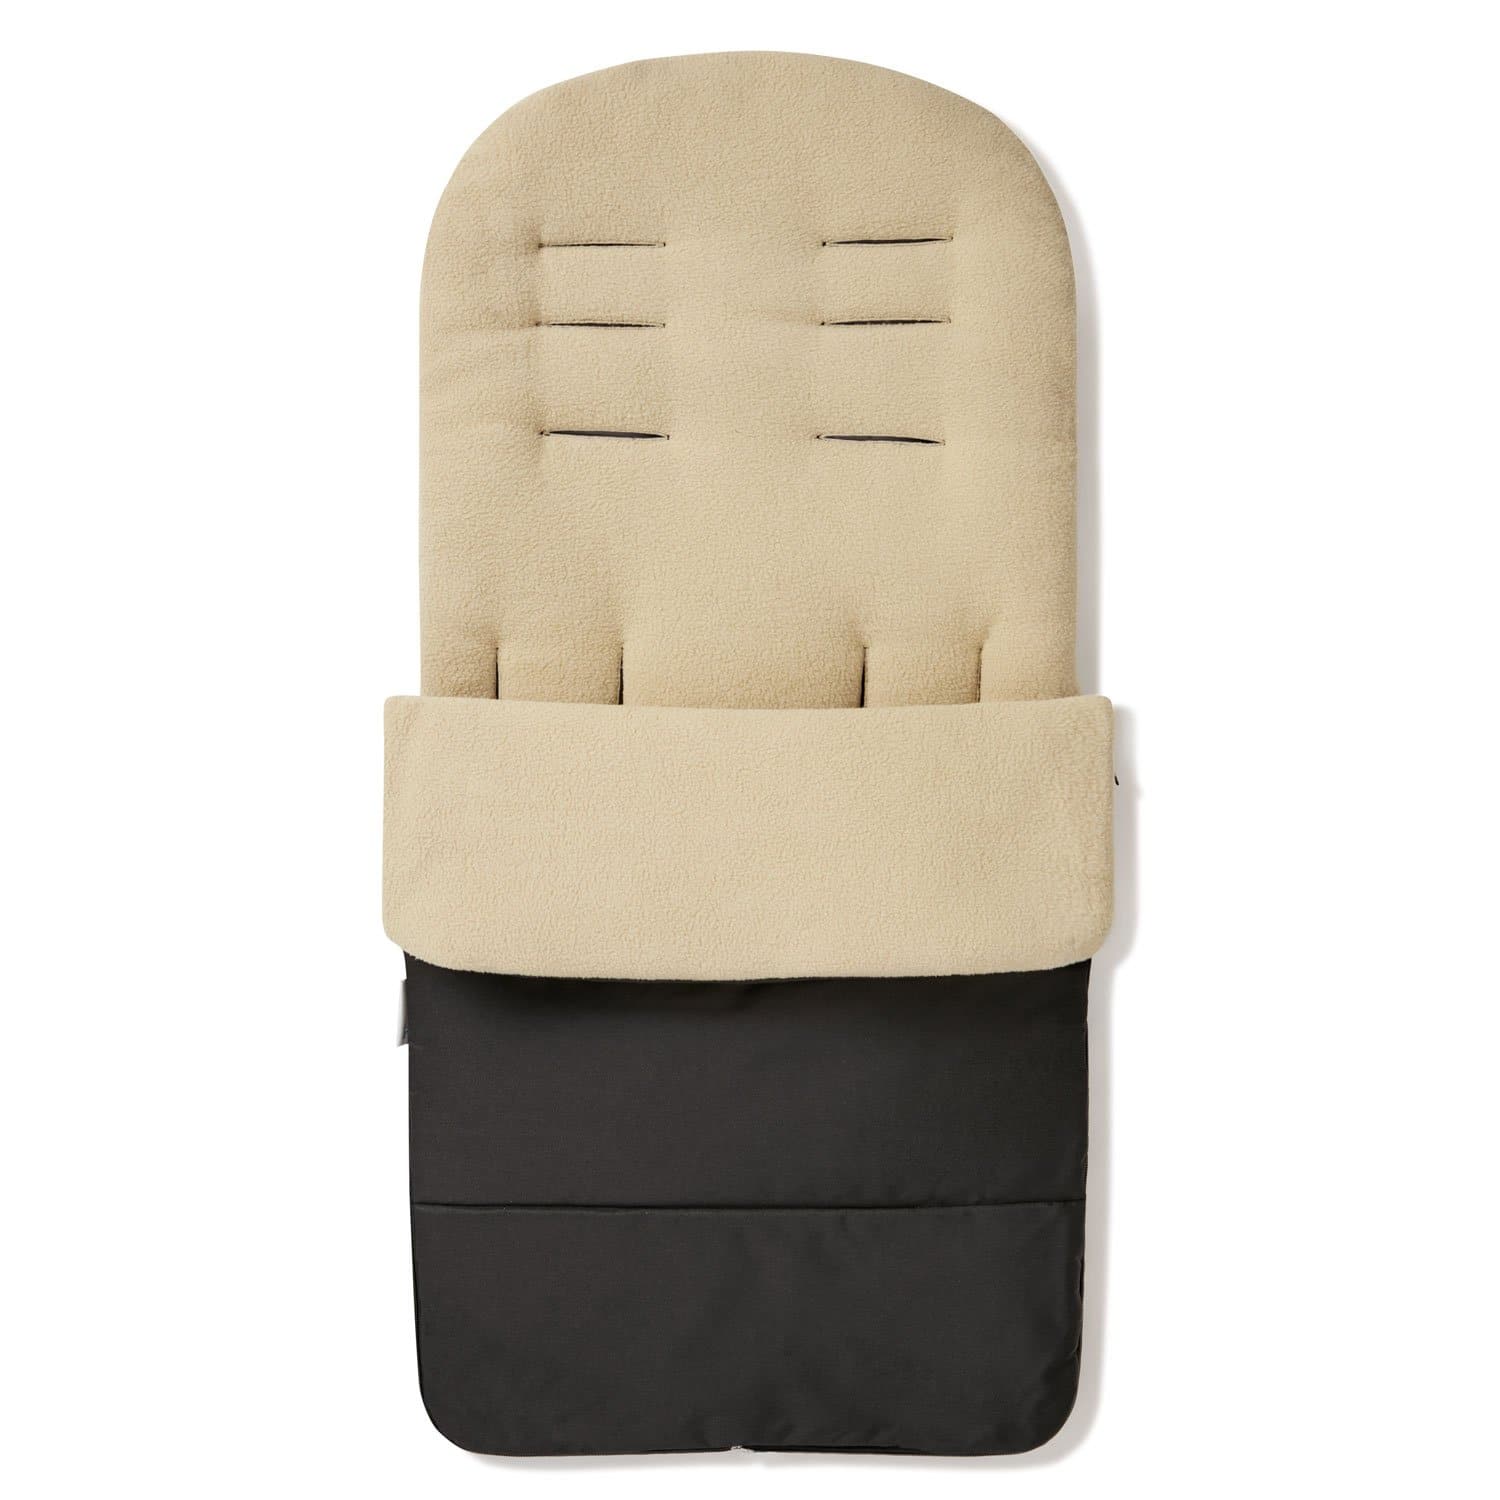 Premium Footmuff / Cosy Toes Compatible with GB - Desert Sand / Fits All Models | For Your Little One